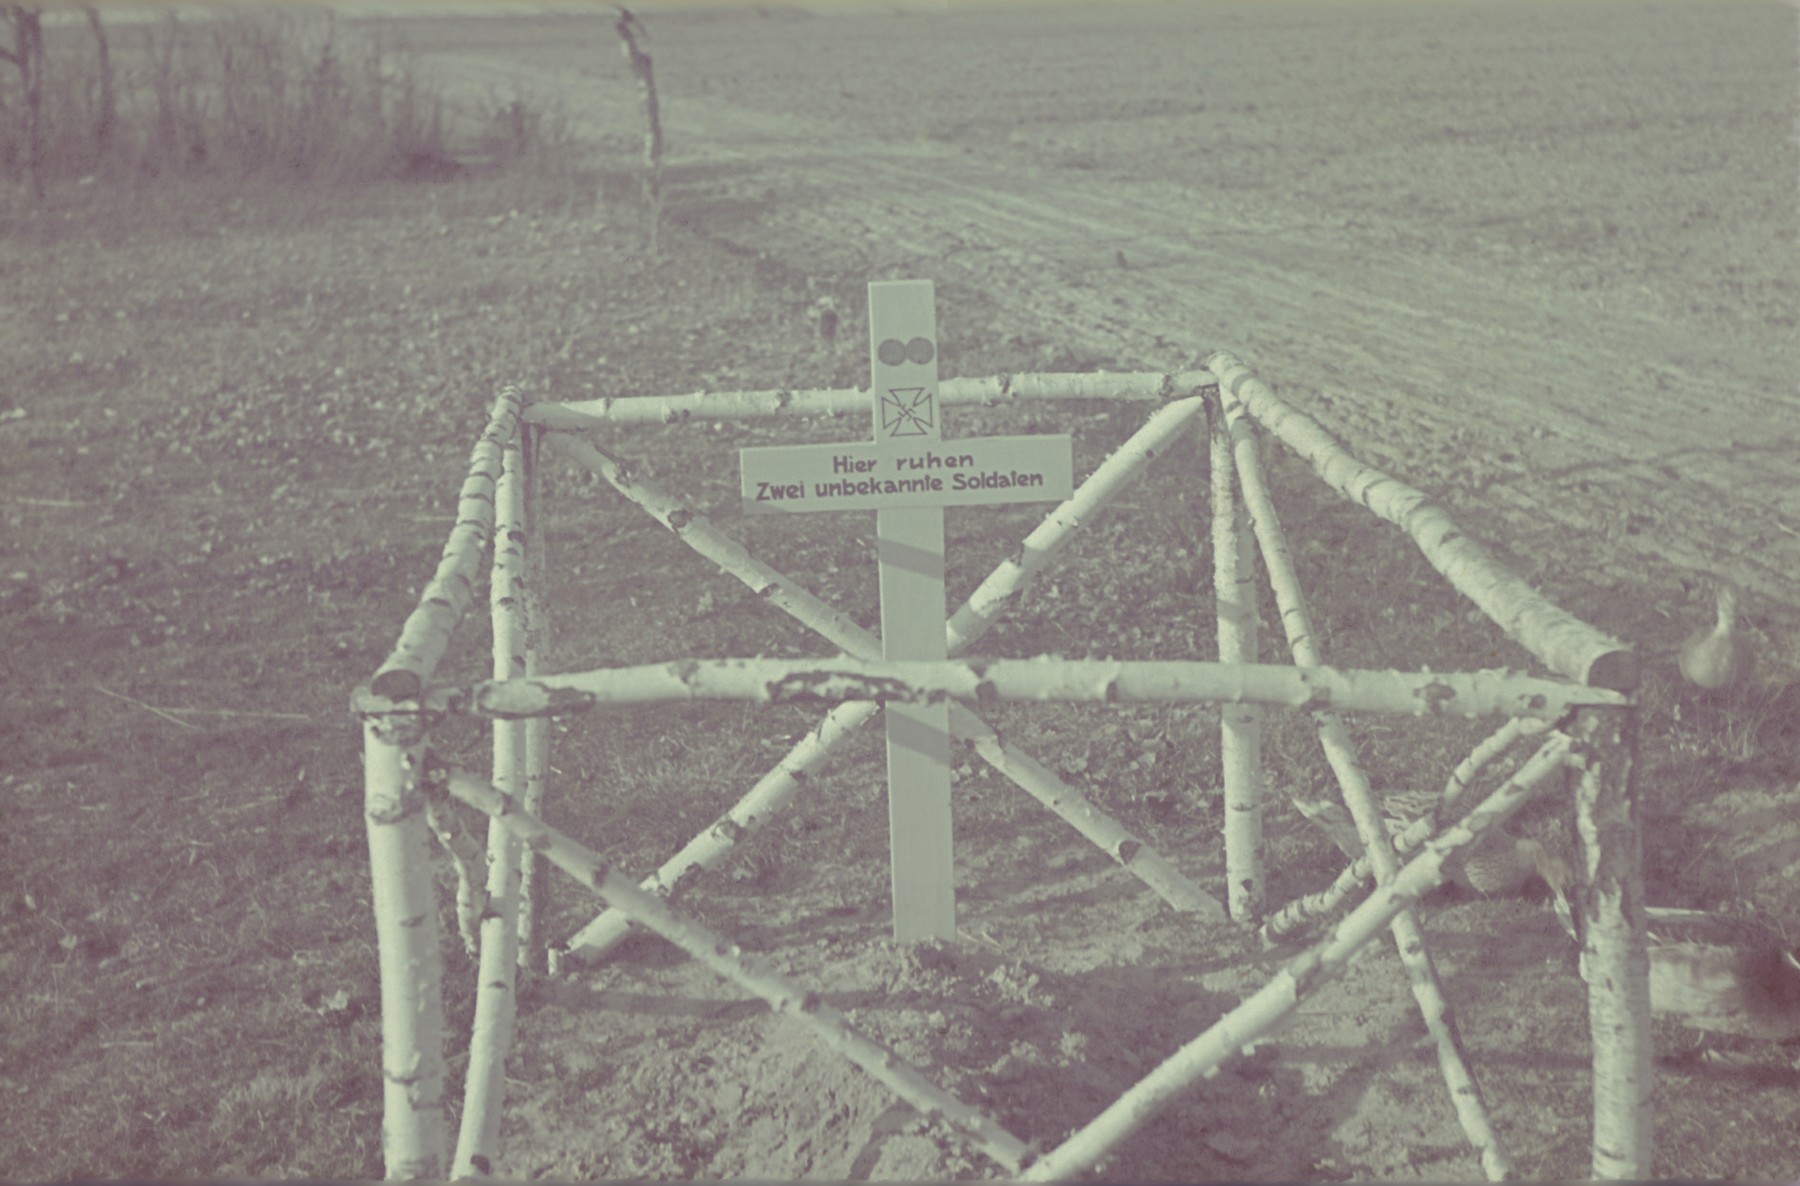 View of a marked Christian grave from the Genewein collection.